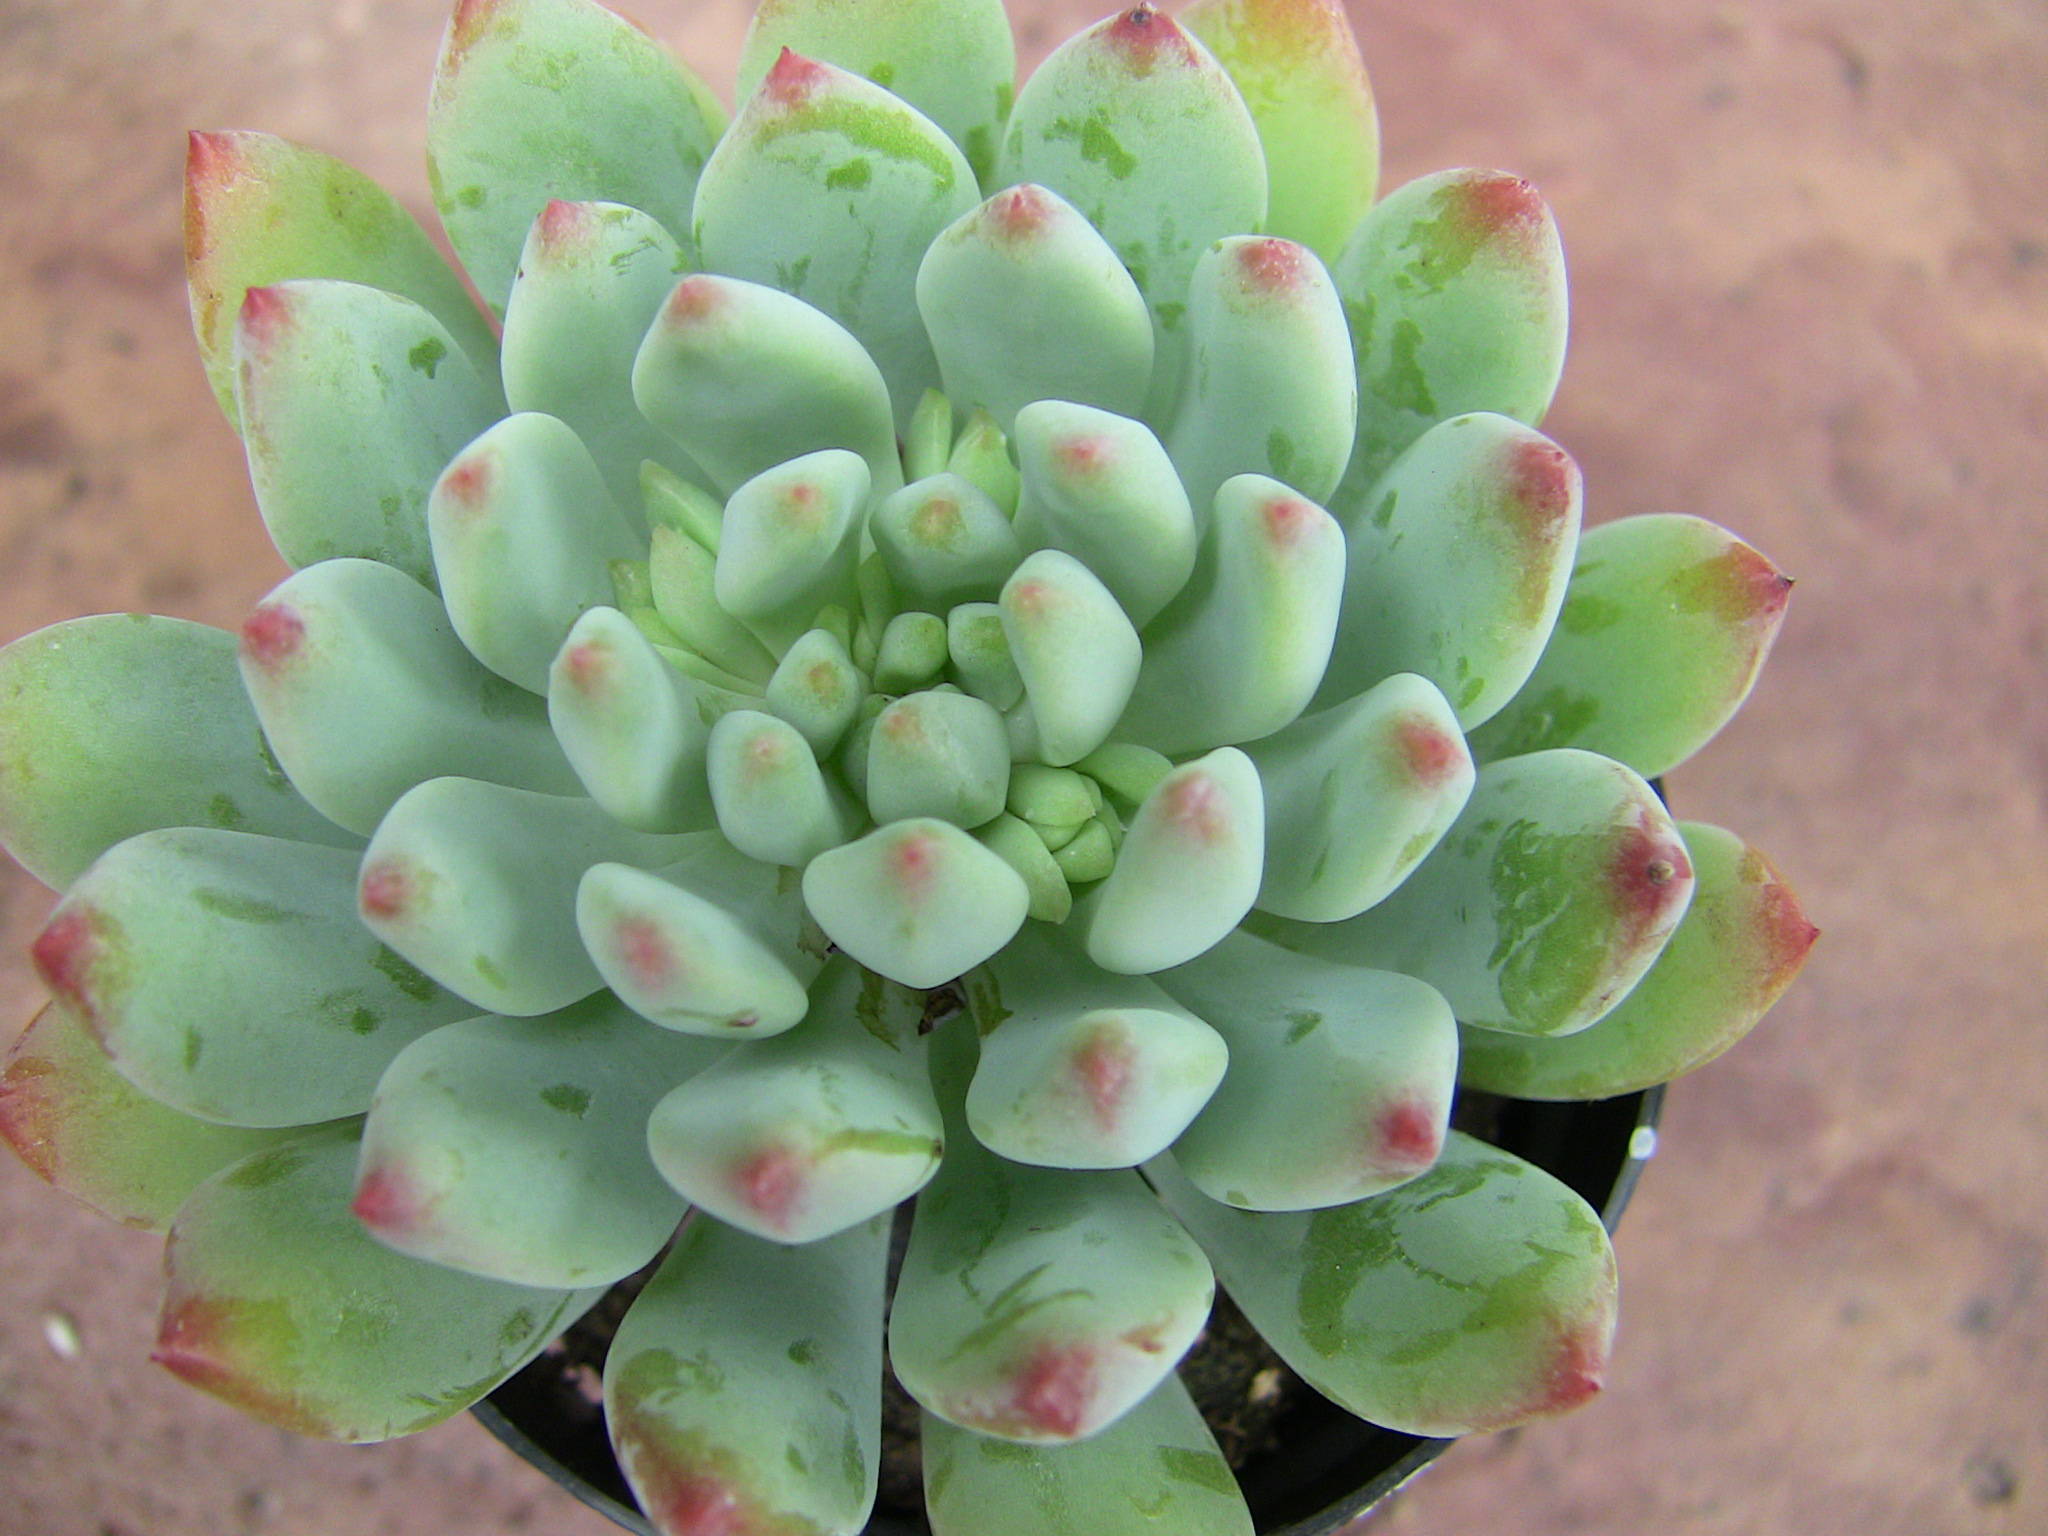 Succulent Types - Succulent of the Month Club Subscription